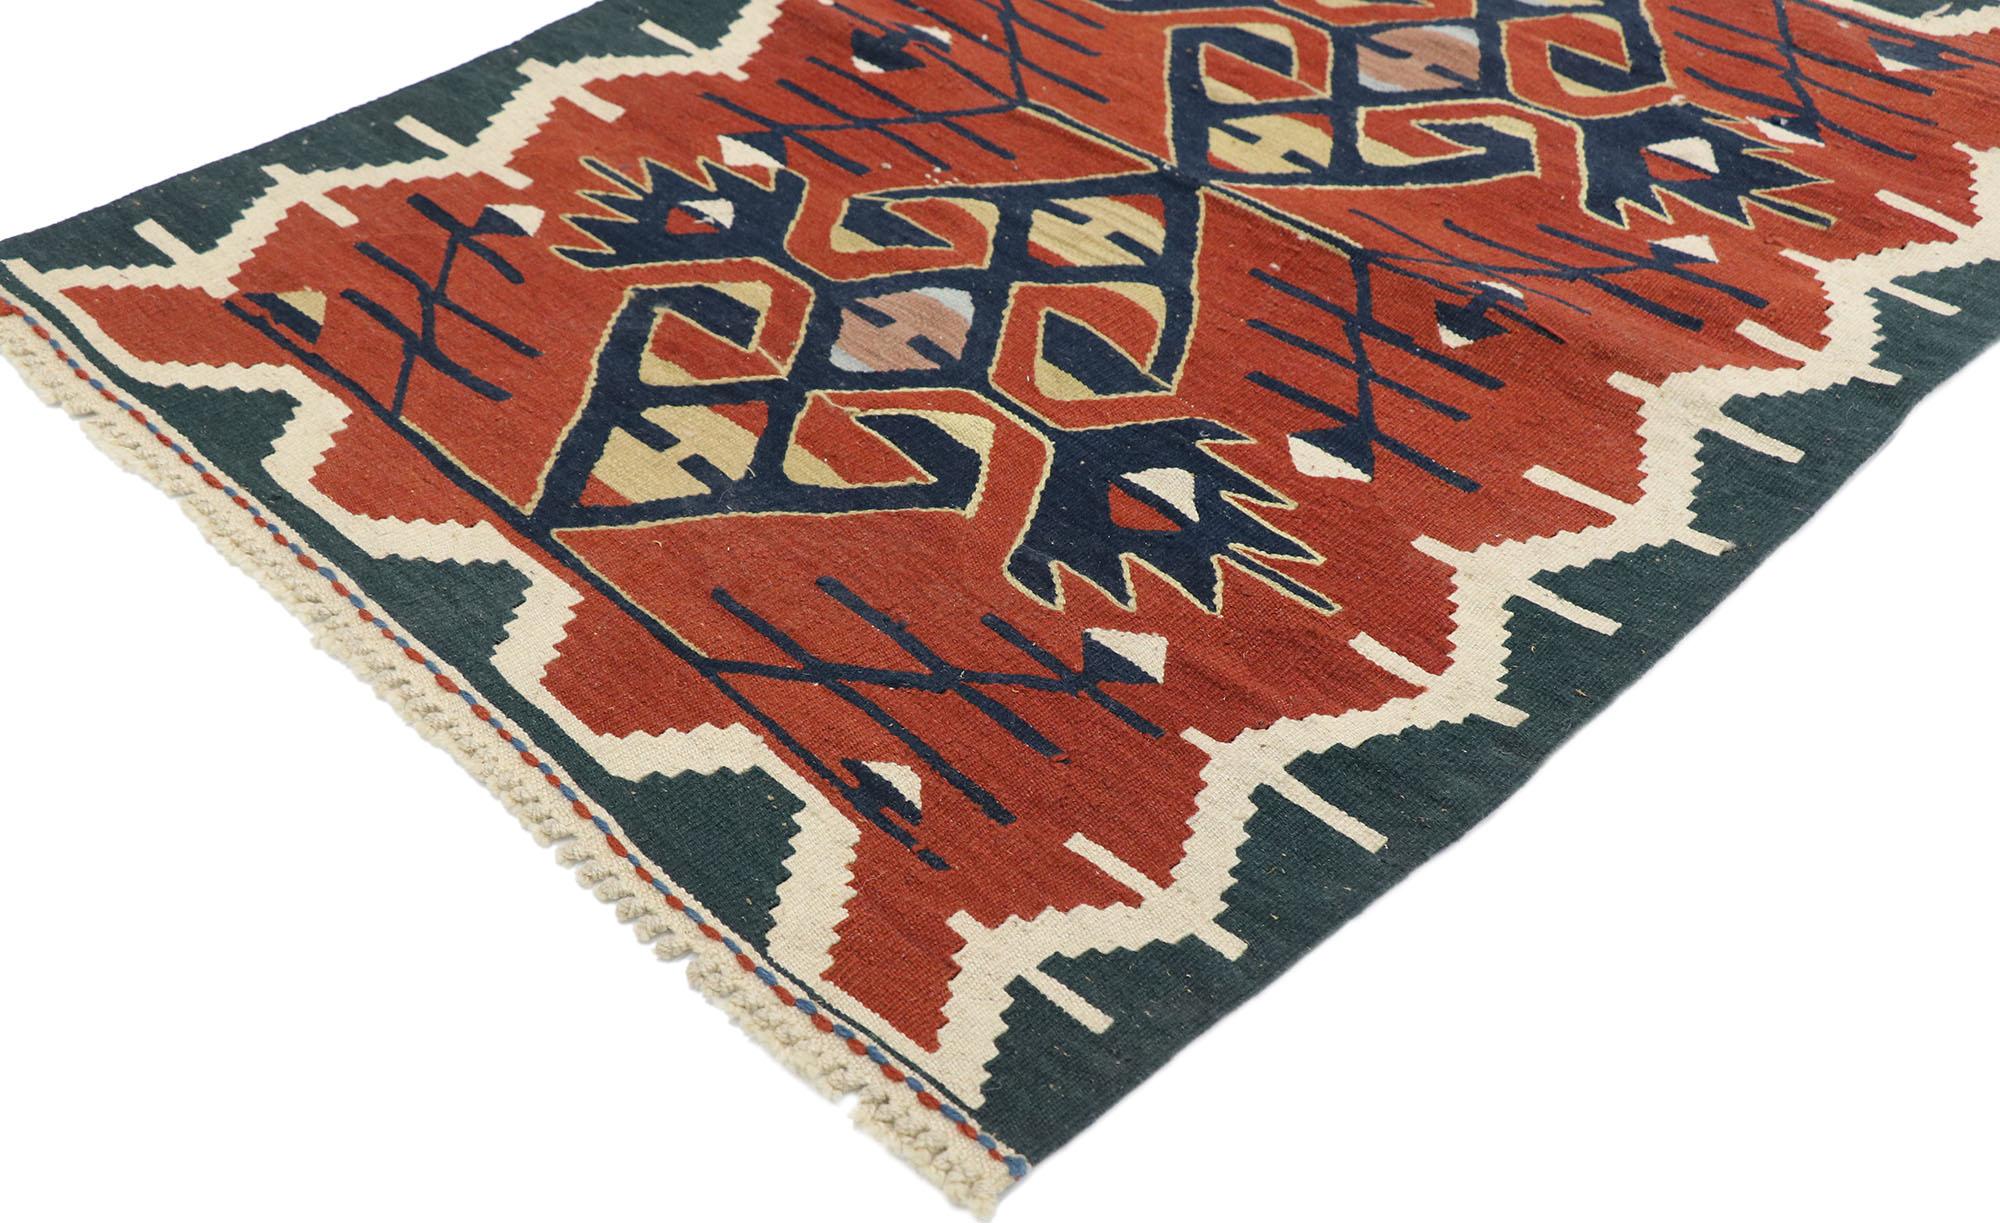 77842, vintage Persian Shiraz Kilim rug with Tribal style. Full of tiny details and a bold expressive design combined with vibrant colors and tribal style, this hand-woven wool vintage Persian Shiraz kilim rug is a captivating vision of woven